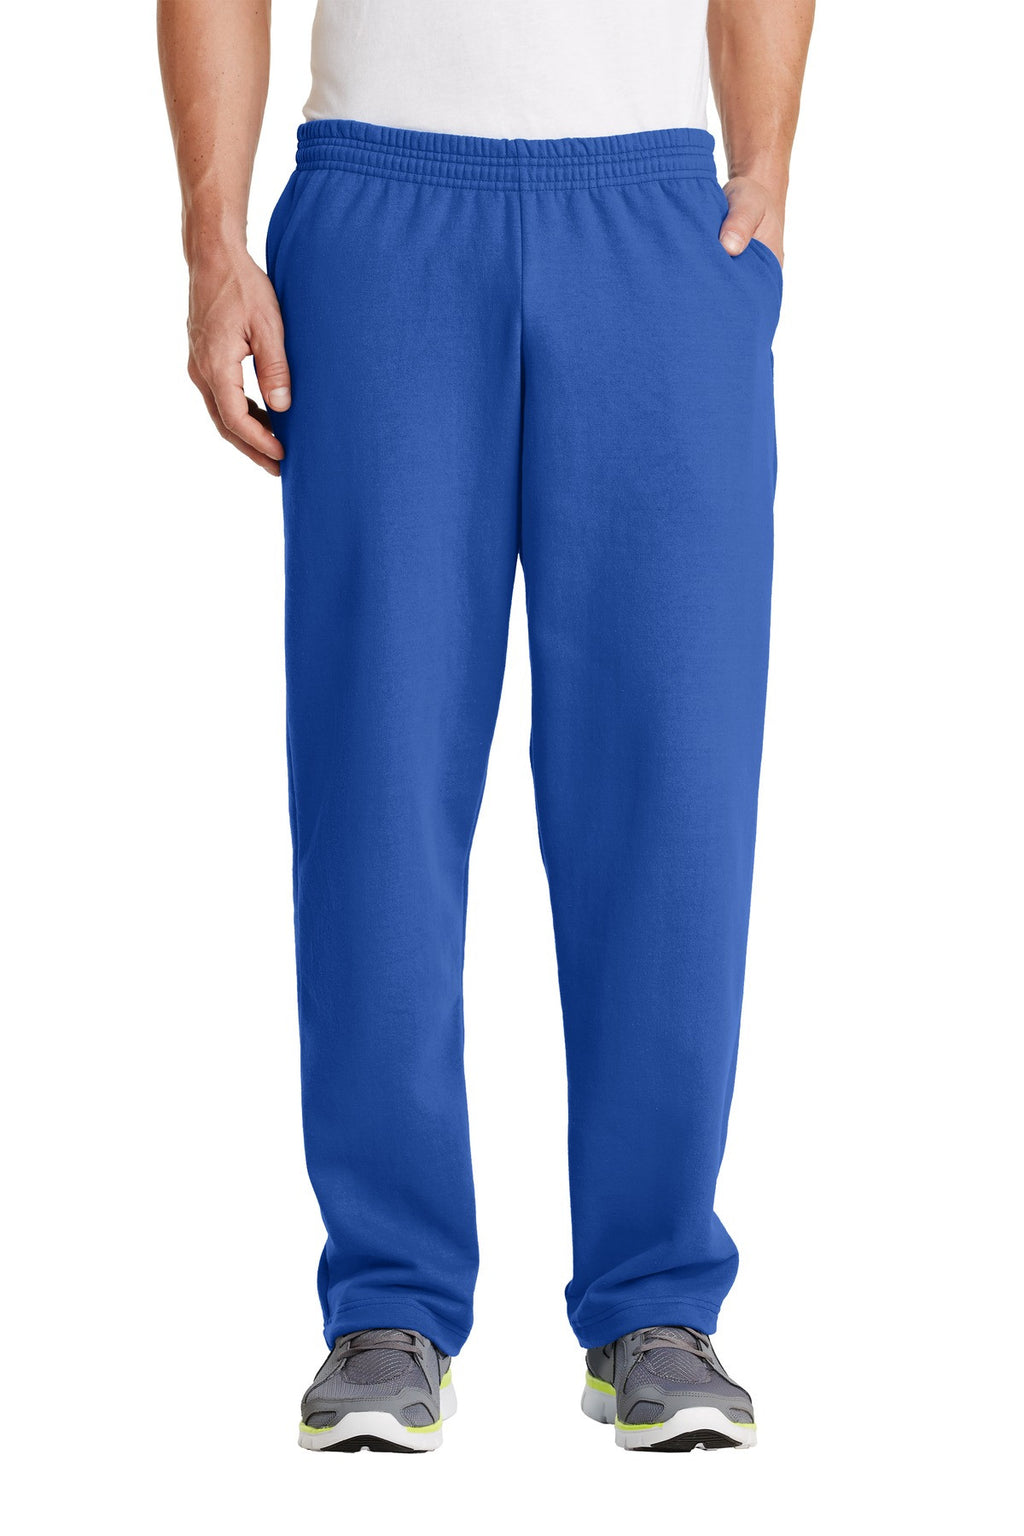 Port & Company Classic Open Bottom Sweatpant With Pockets-8